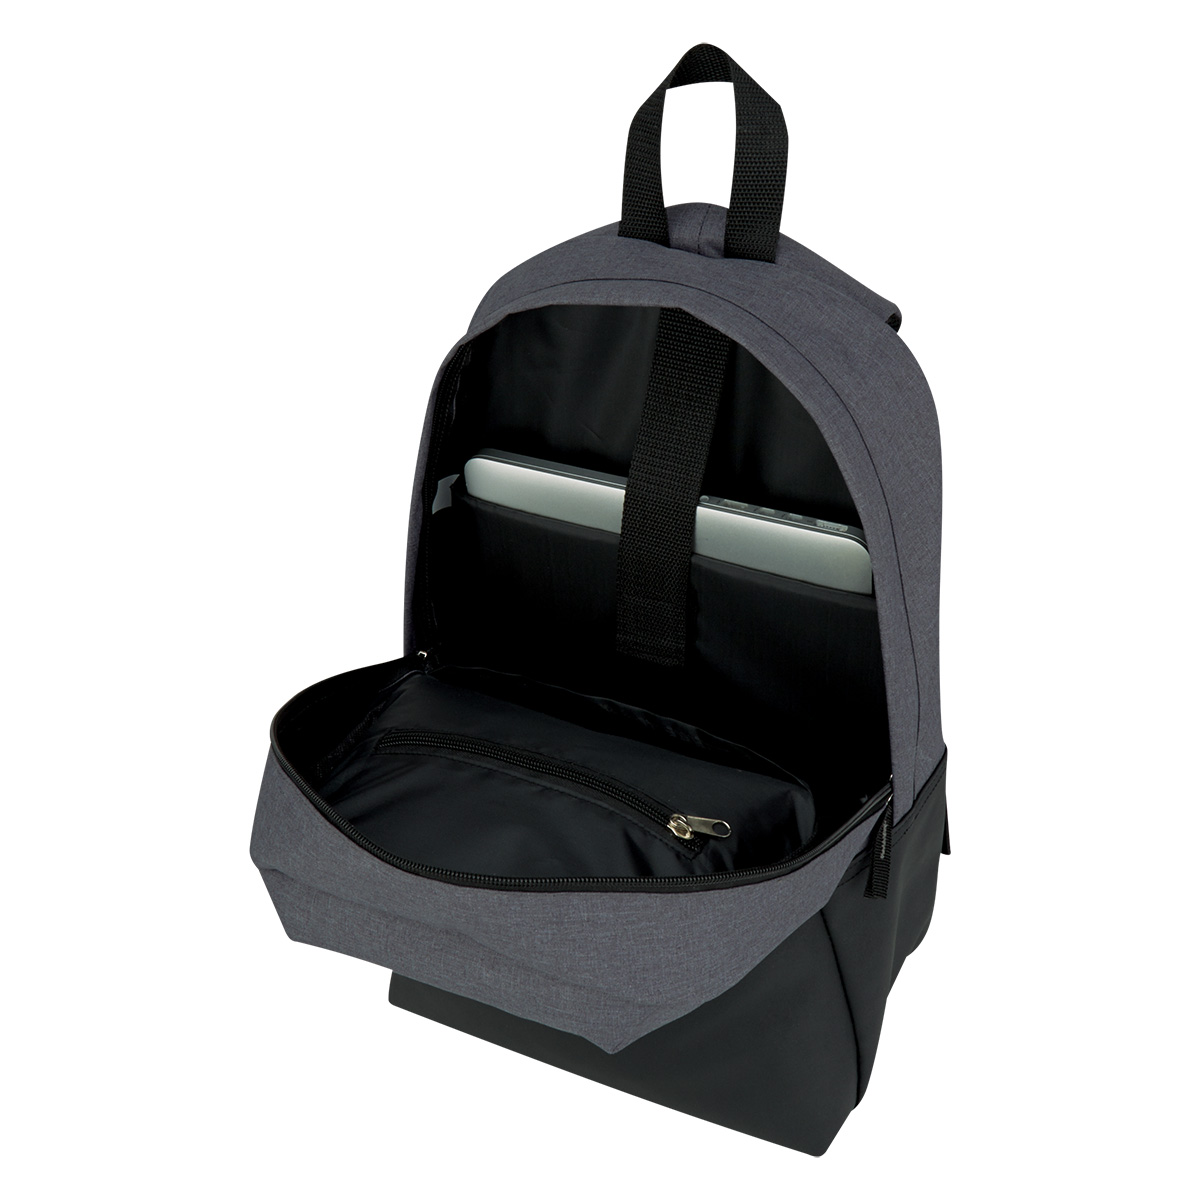 3439-computer-backpack-with-charging-port-hit-promotional-products